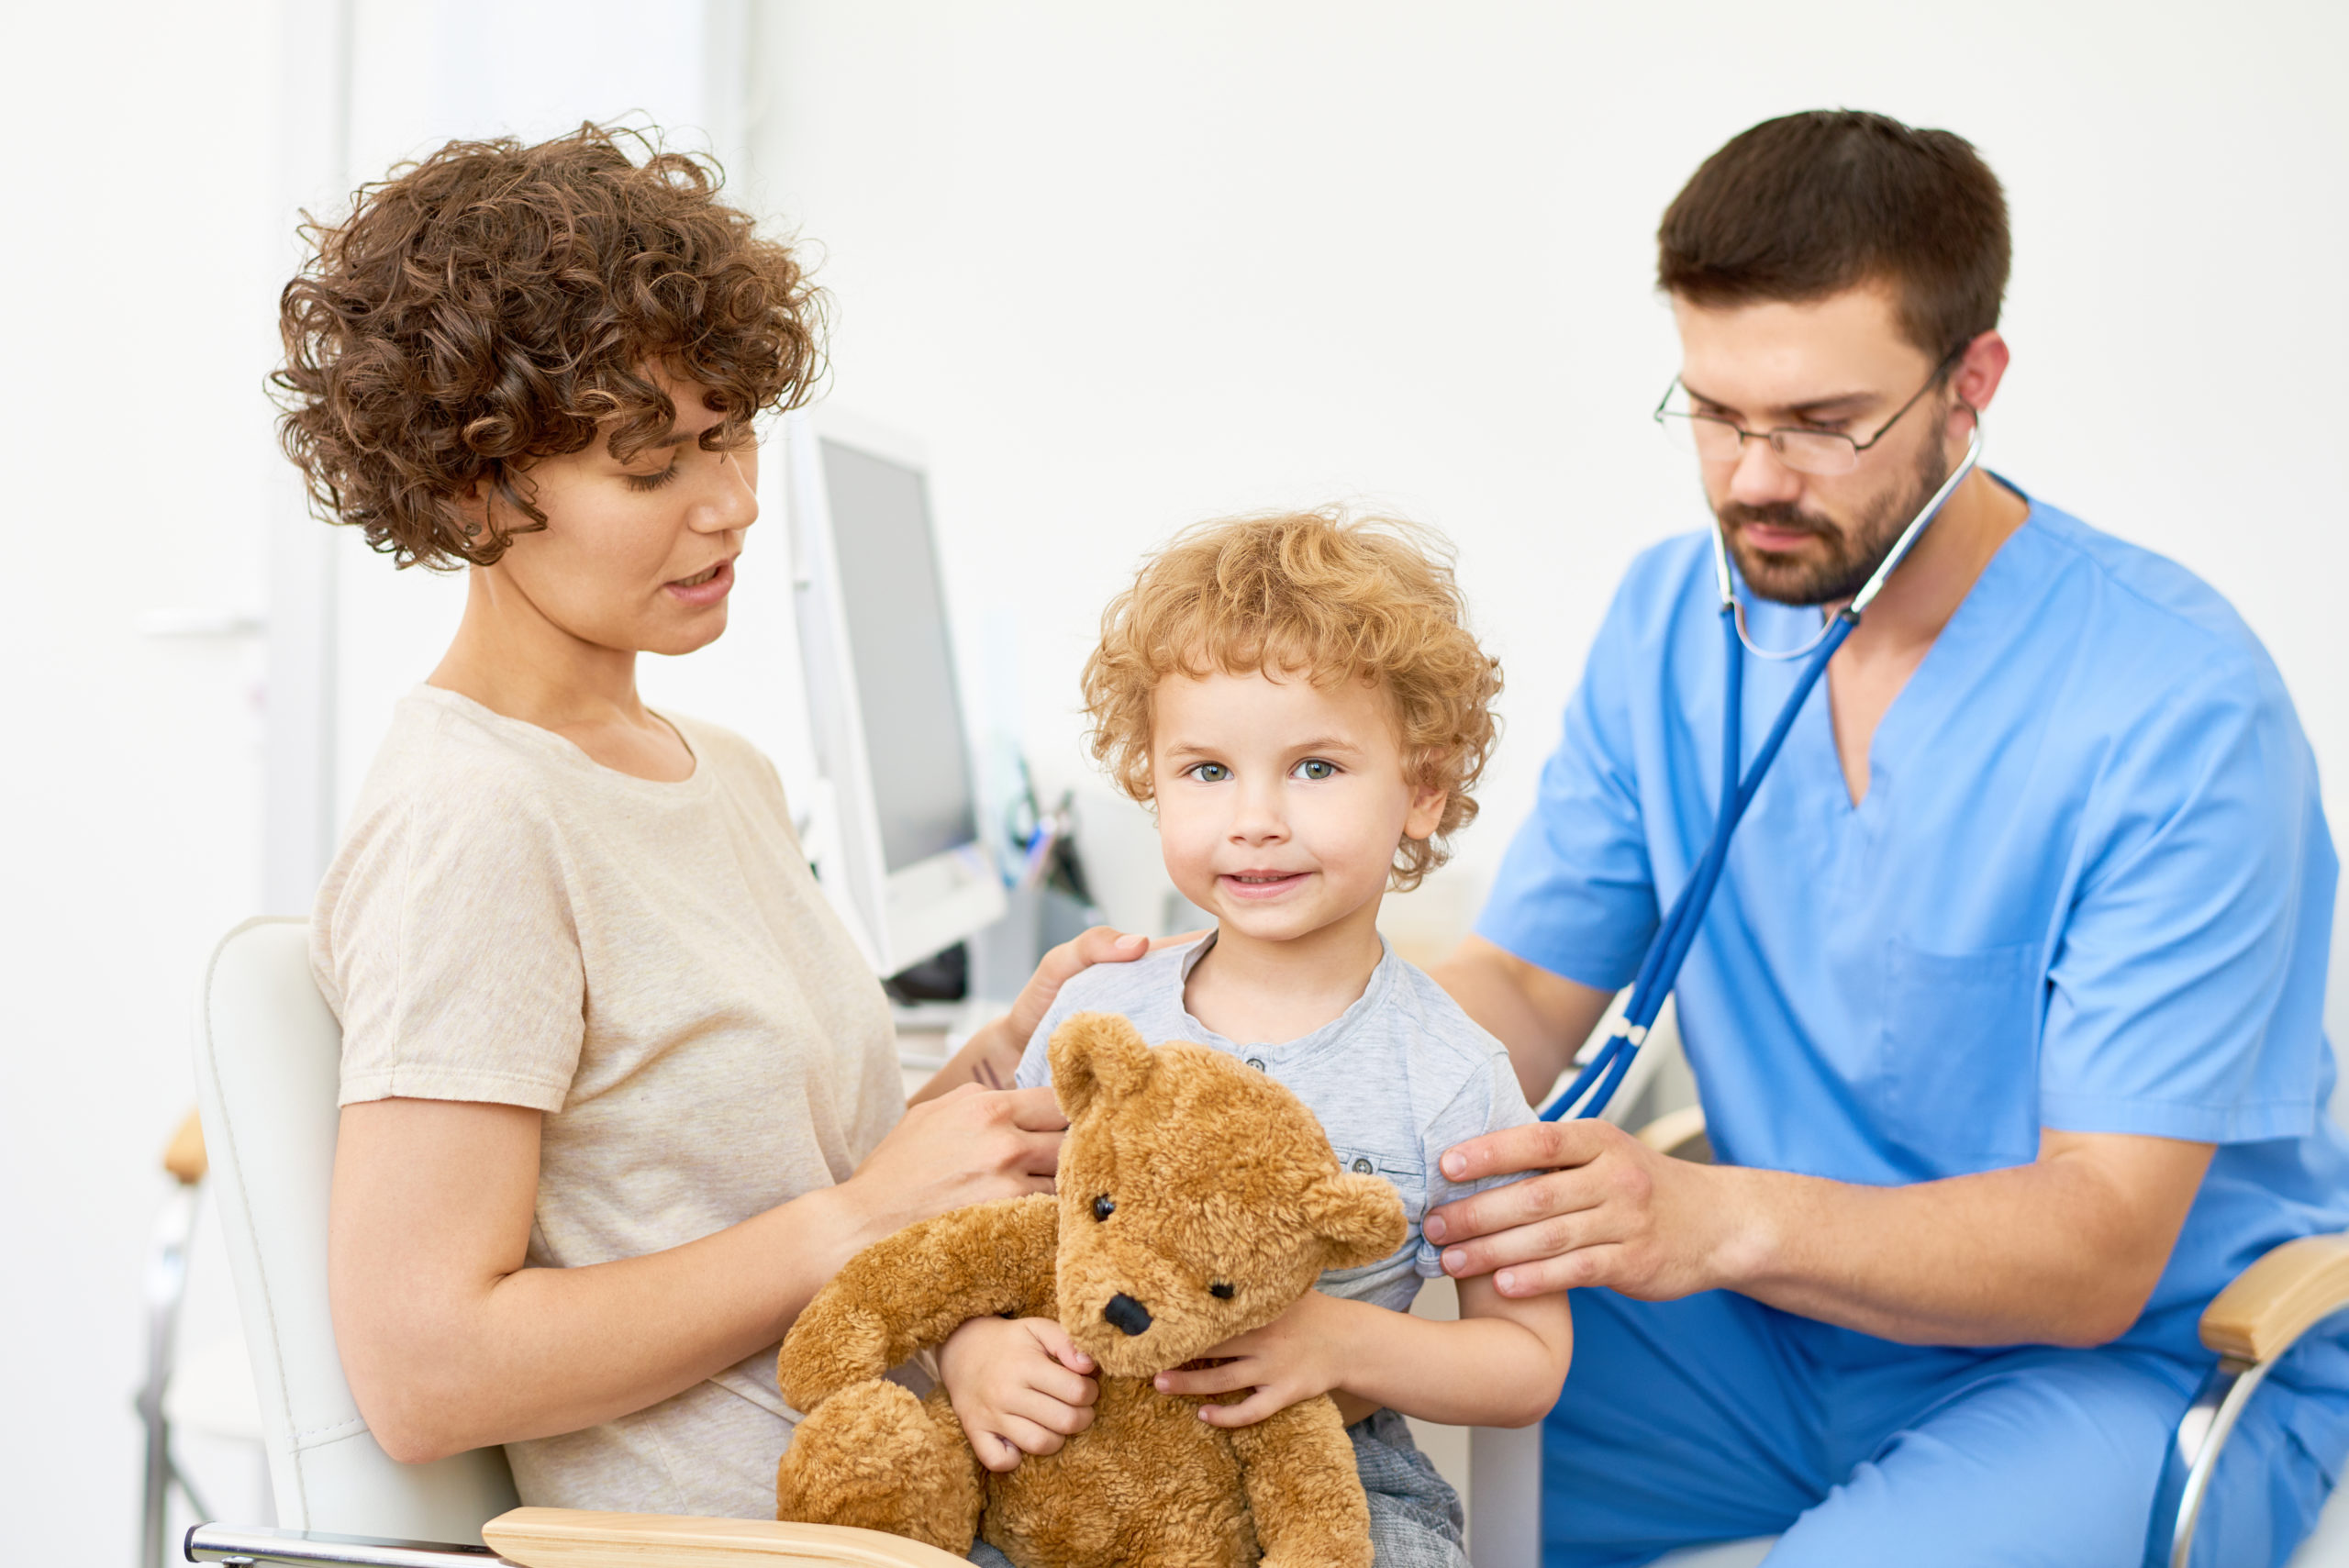 How to Help Your Child Fast Before Pediatric Surgery